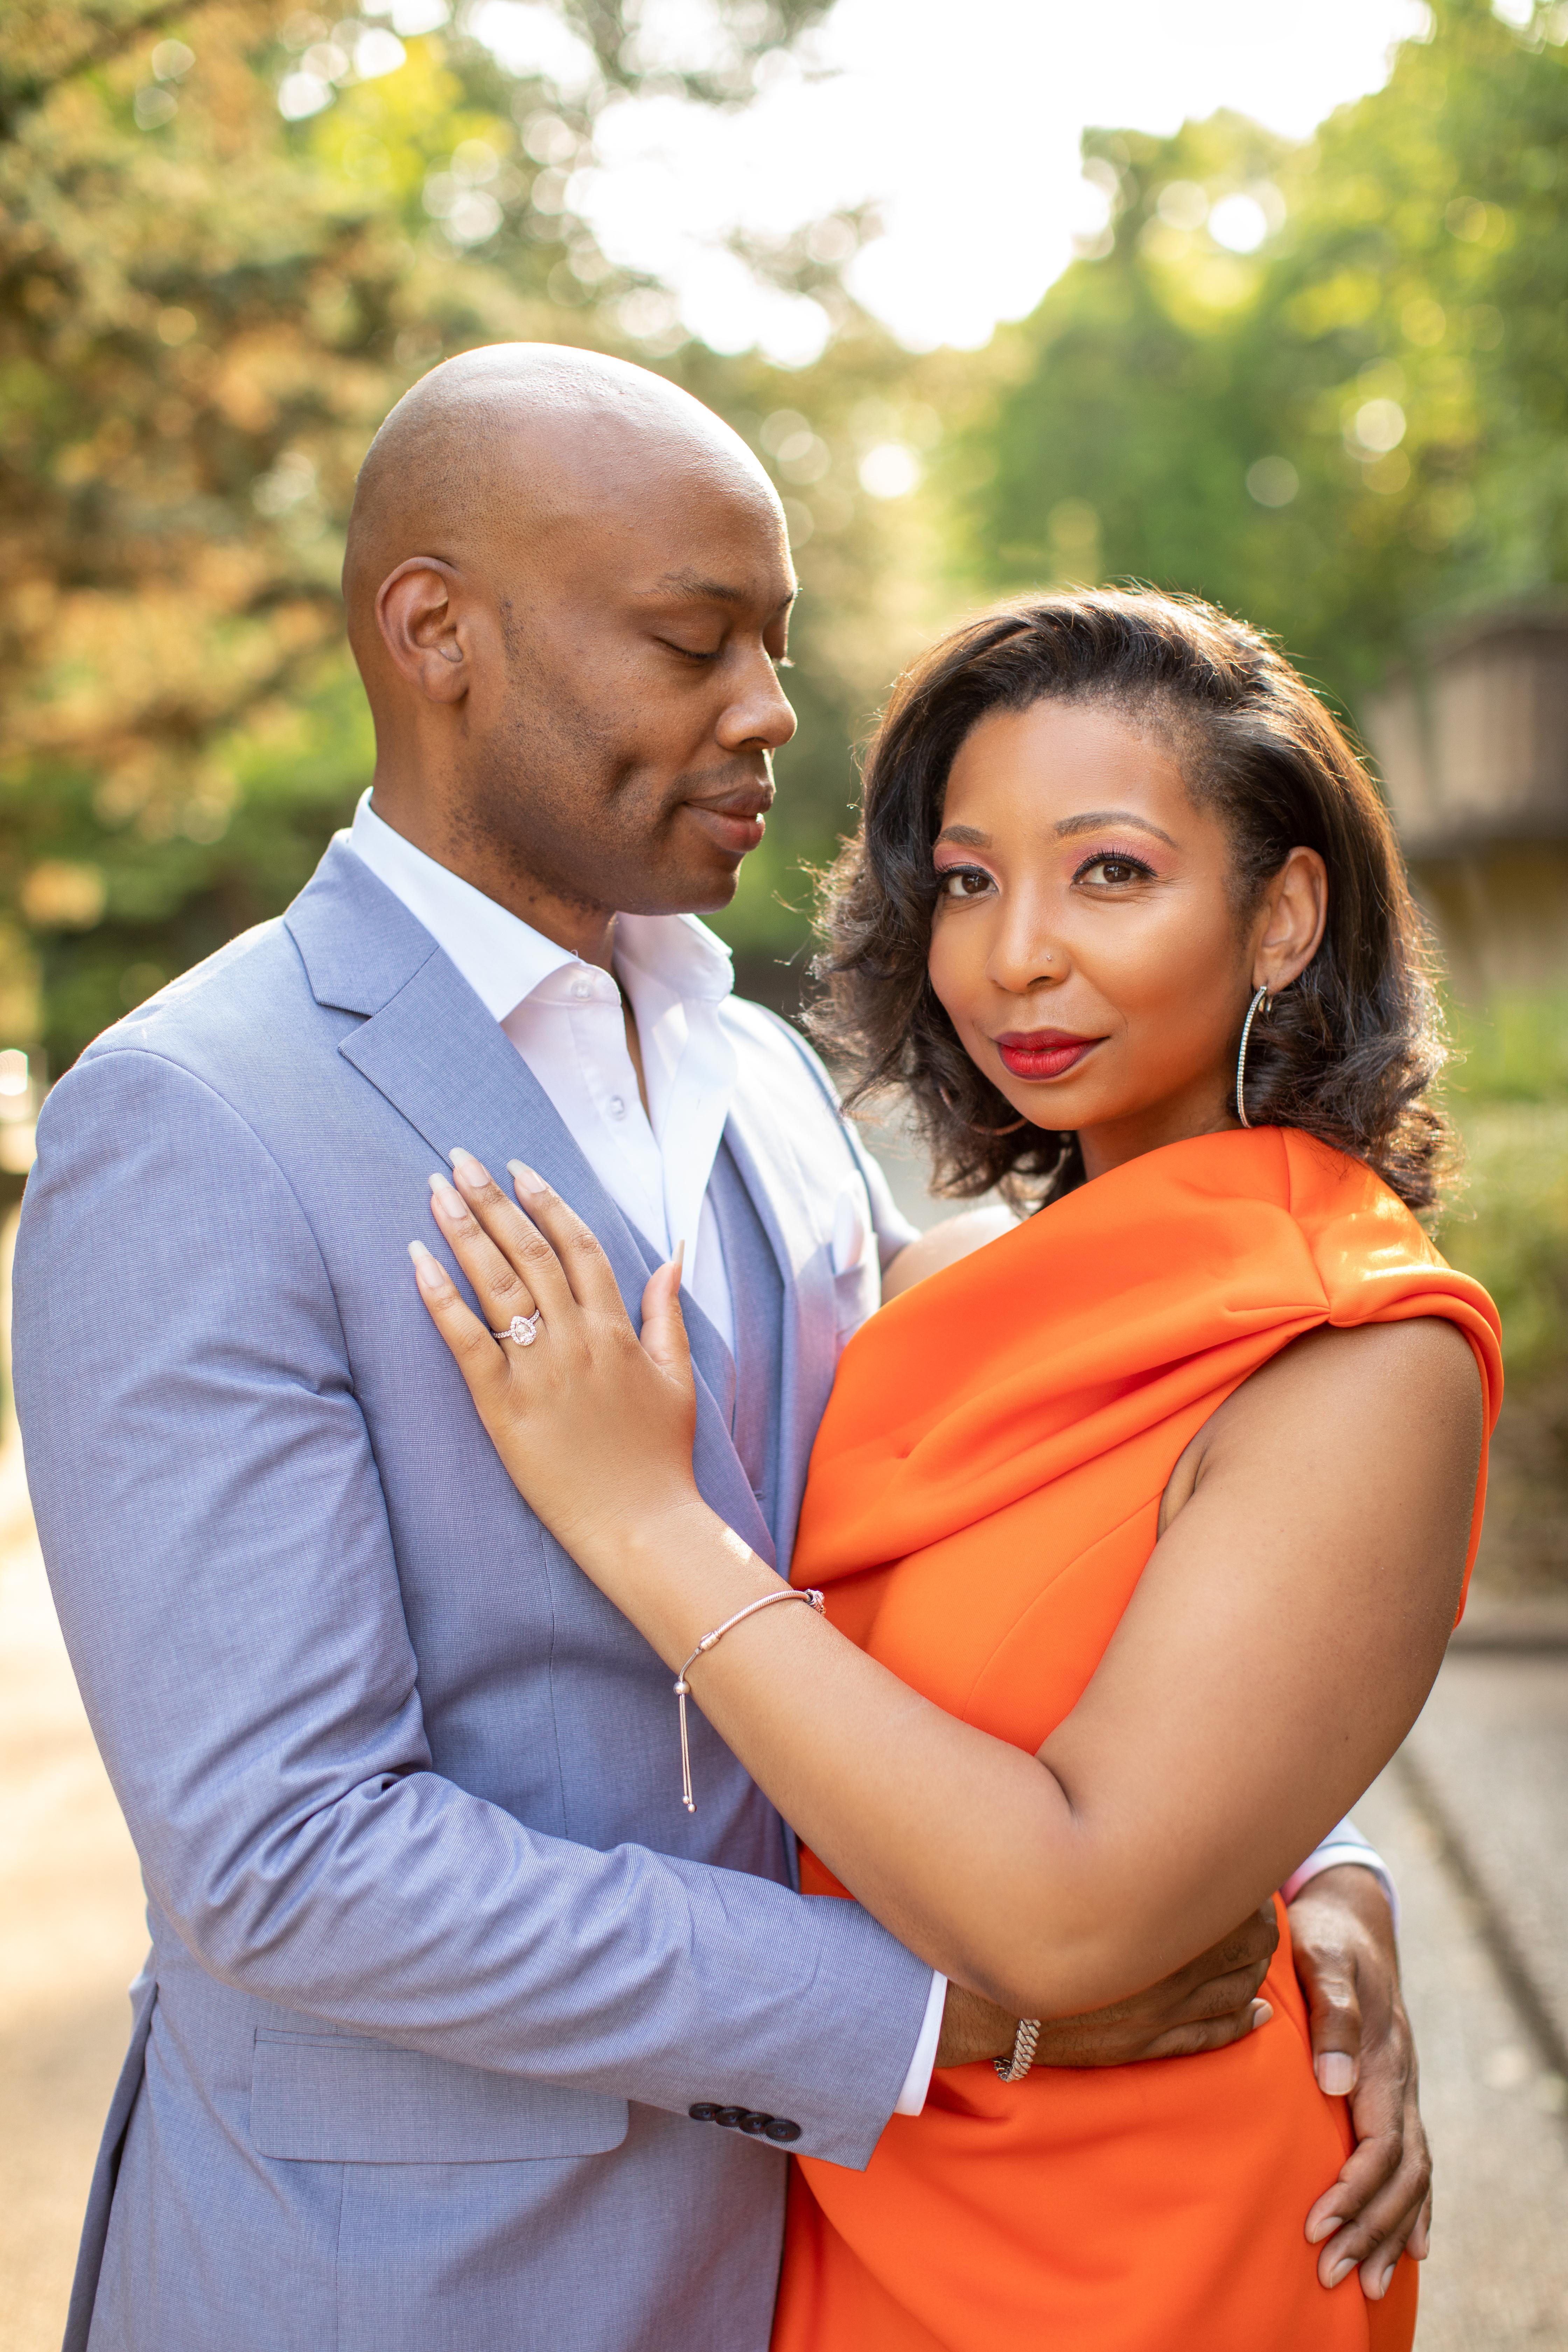 The Wedding Website of Amecia Starks and Irvin Edwards II